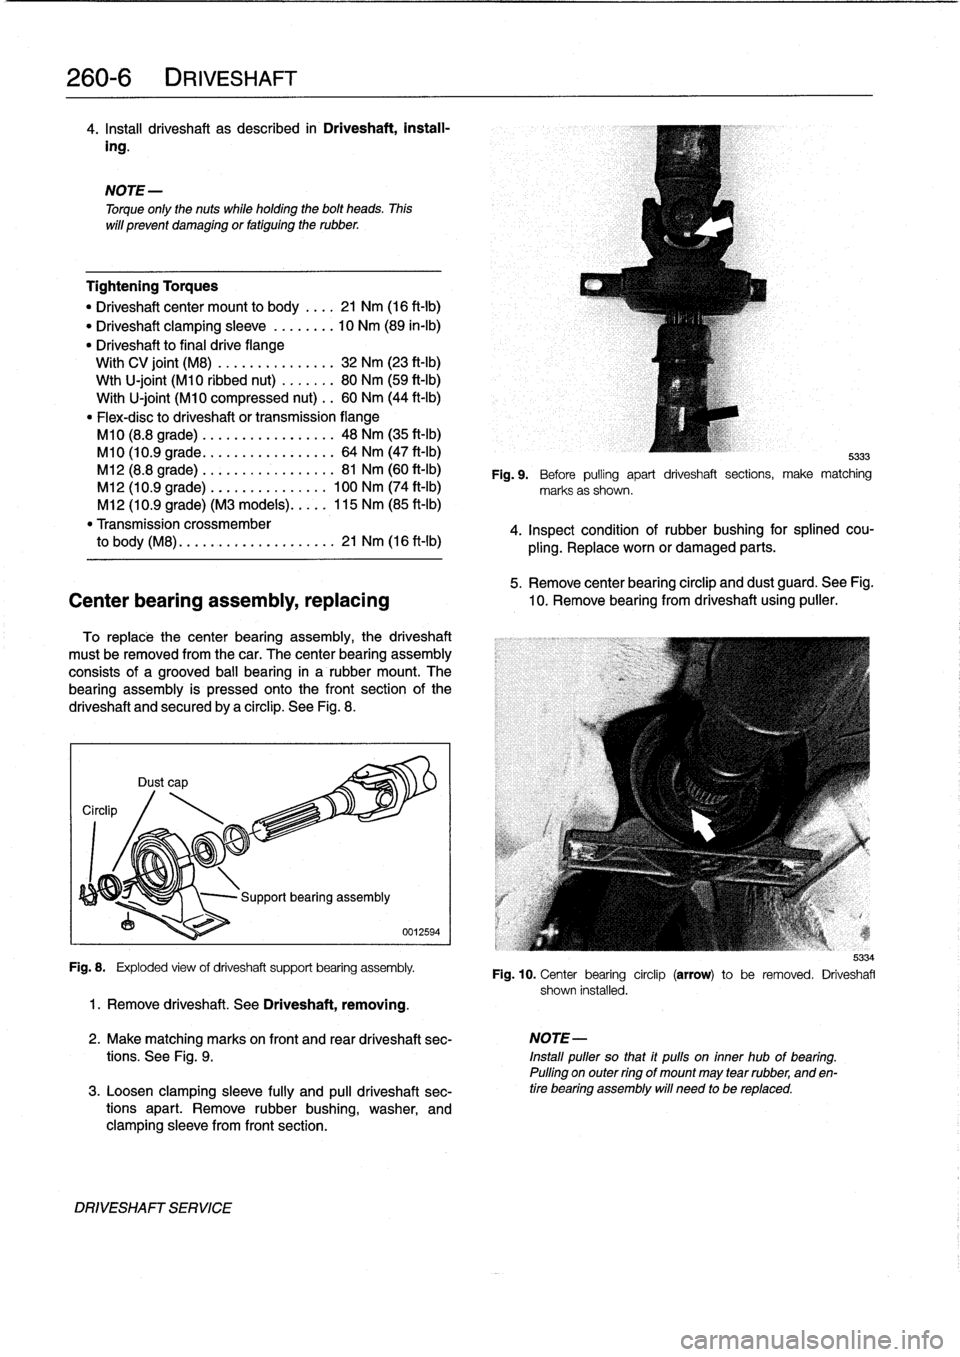 BMW 328i 1997 E36 Workshop Manual 
260-
6
DRIVESHAFT

4
.
Insta¡¡
driveshaft
as
described
in
Driveshaft,
install-

ing
.

Tightening
Torques

"
Driveshaft
center
mount
to
body
.
...
21
Nm
(16
ft-Ib)

"
Driveshaft
clamping
sleeve
...